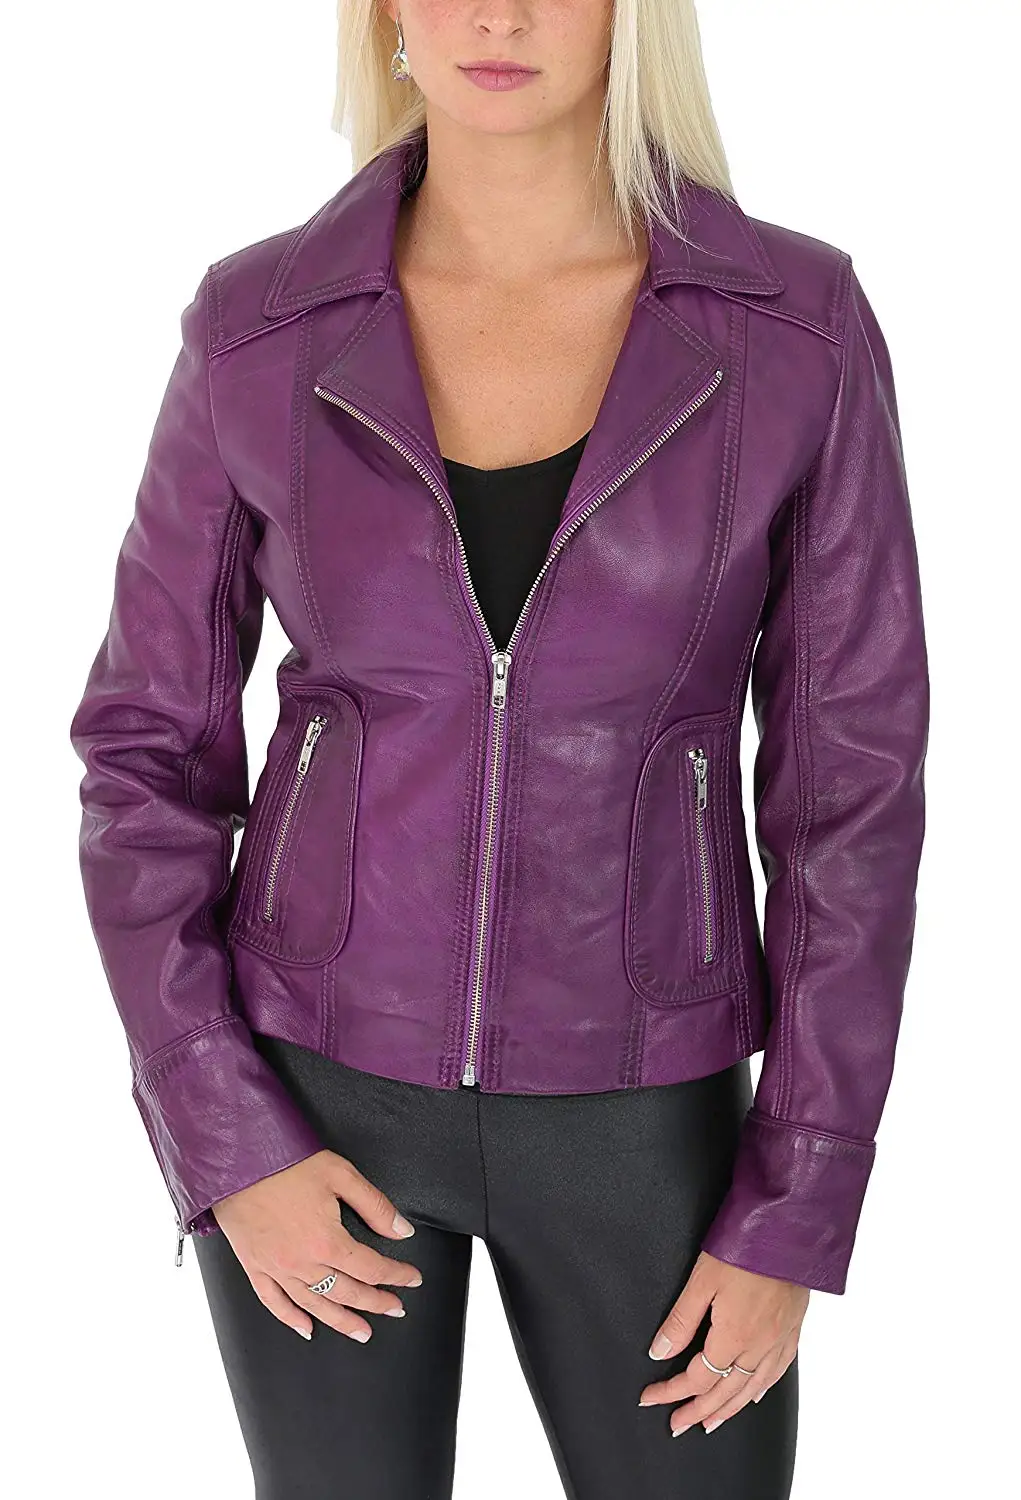 Cheap Fitted Leather Jacket Womens Find Fitted Leather Jacket Womens